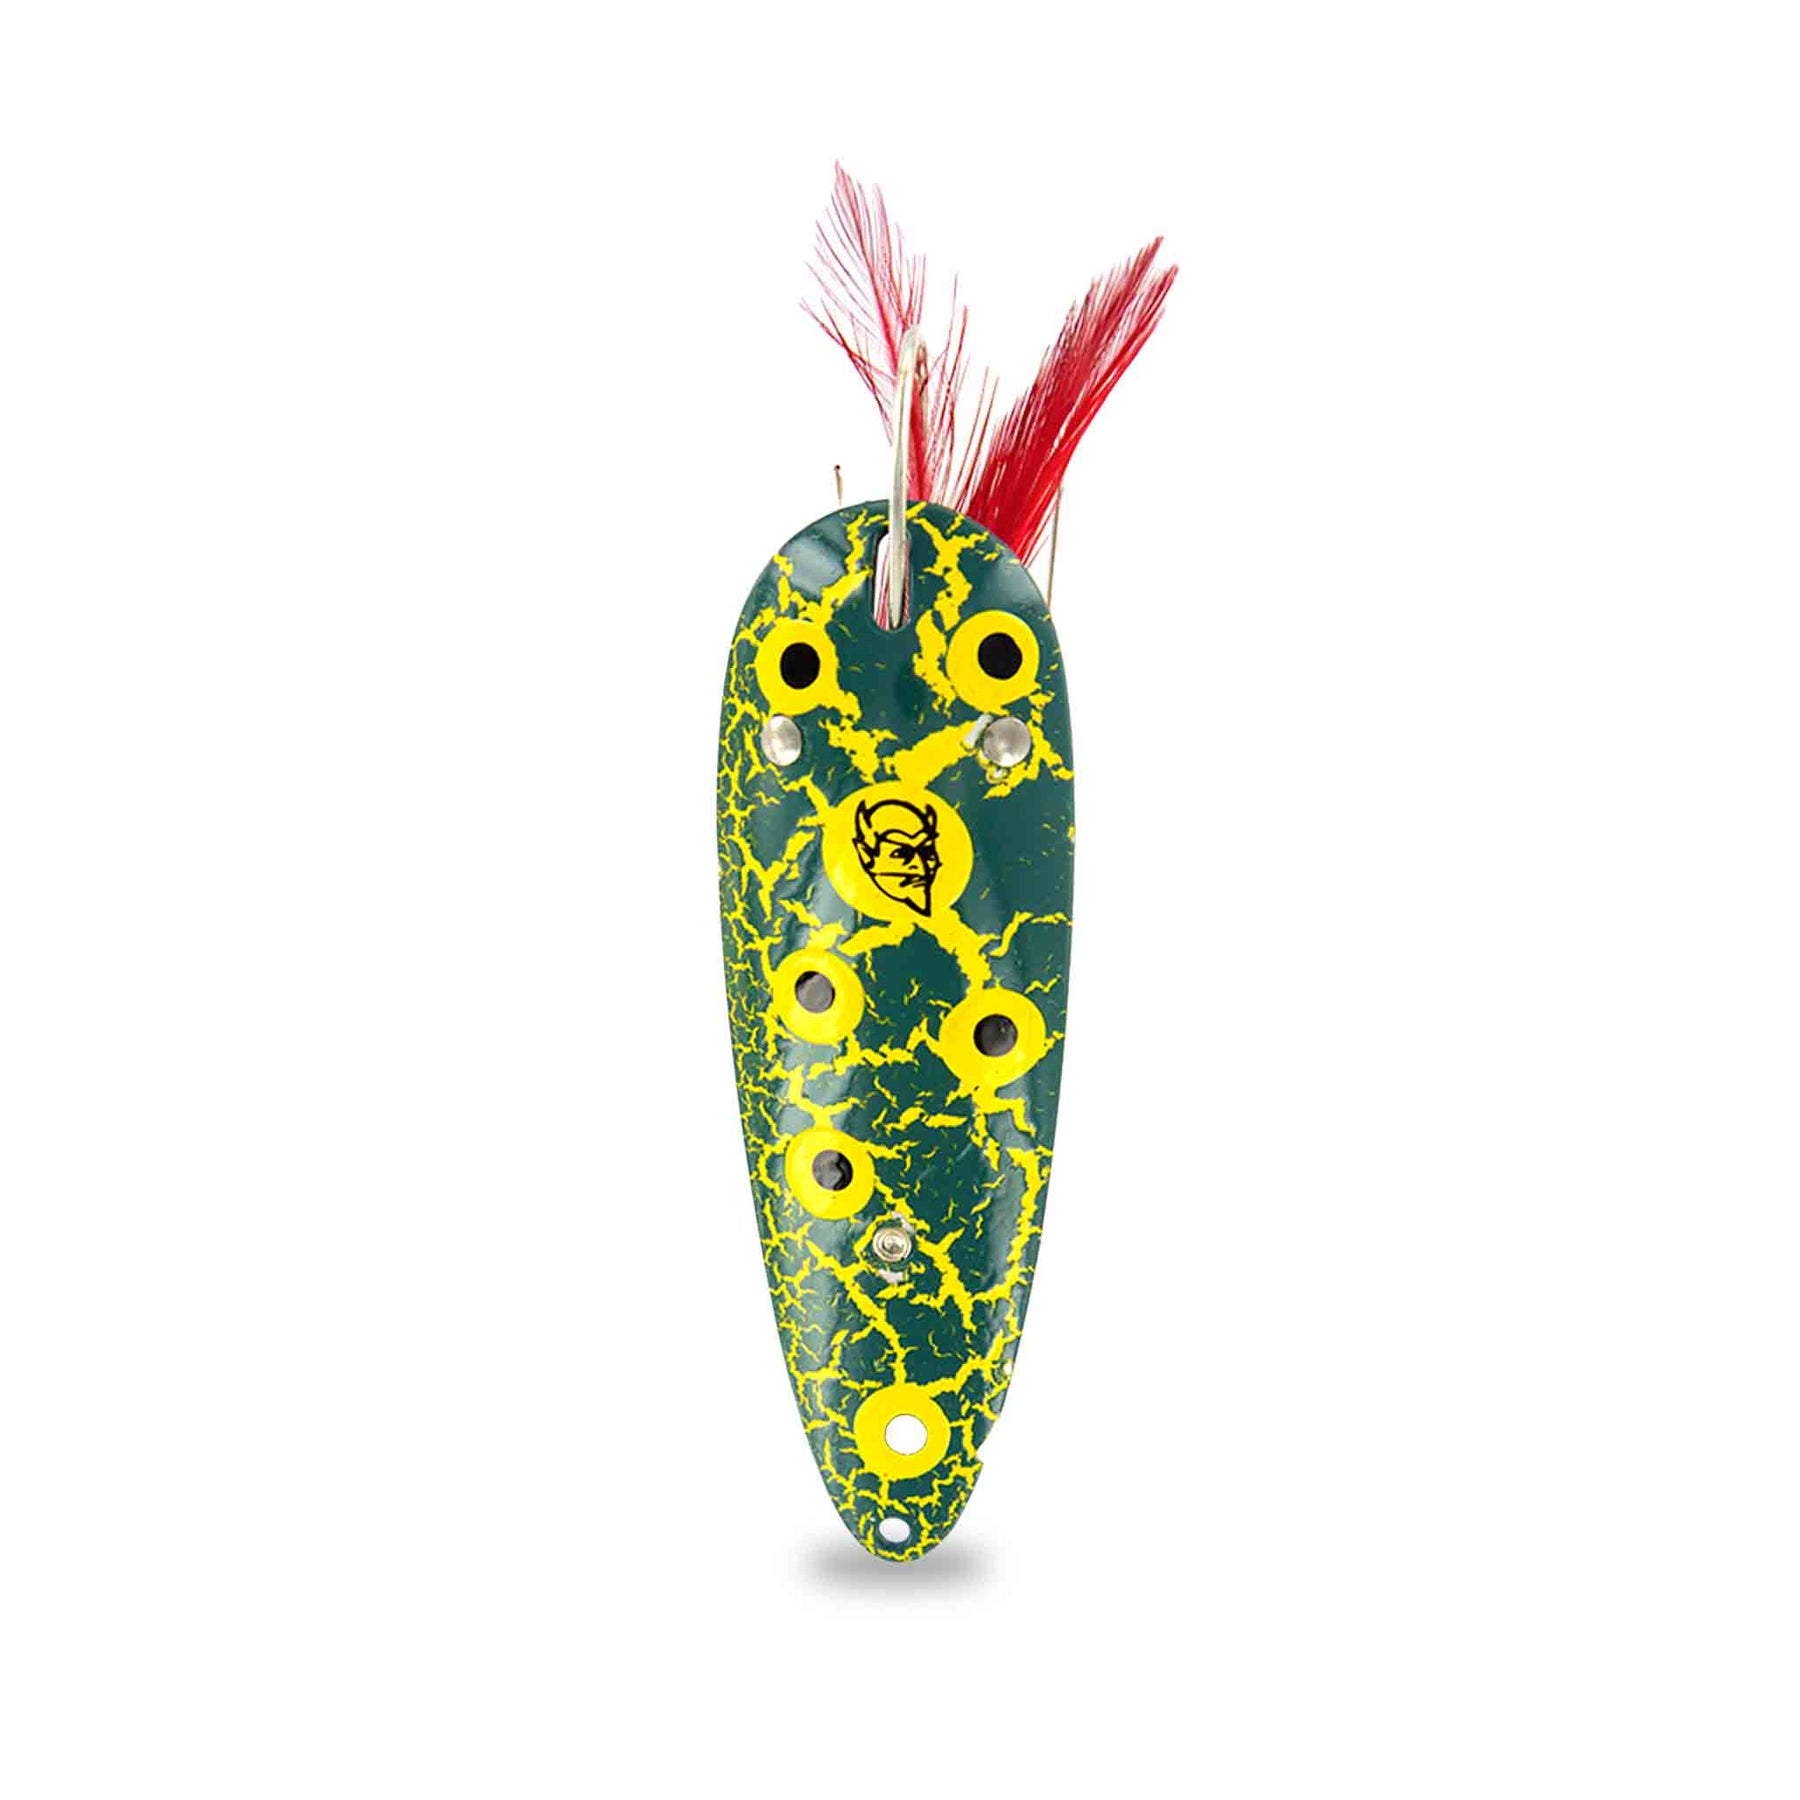 Eppinger Weedless Dardevle 1oz Spoon Yellow/Red Diamonds